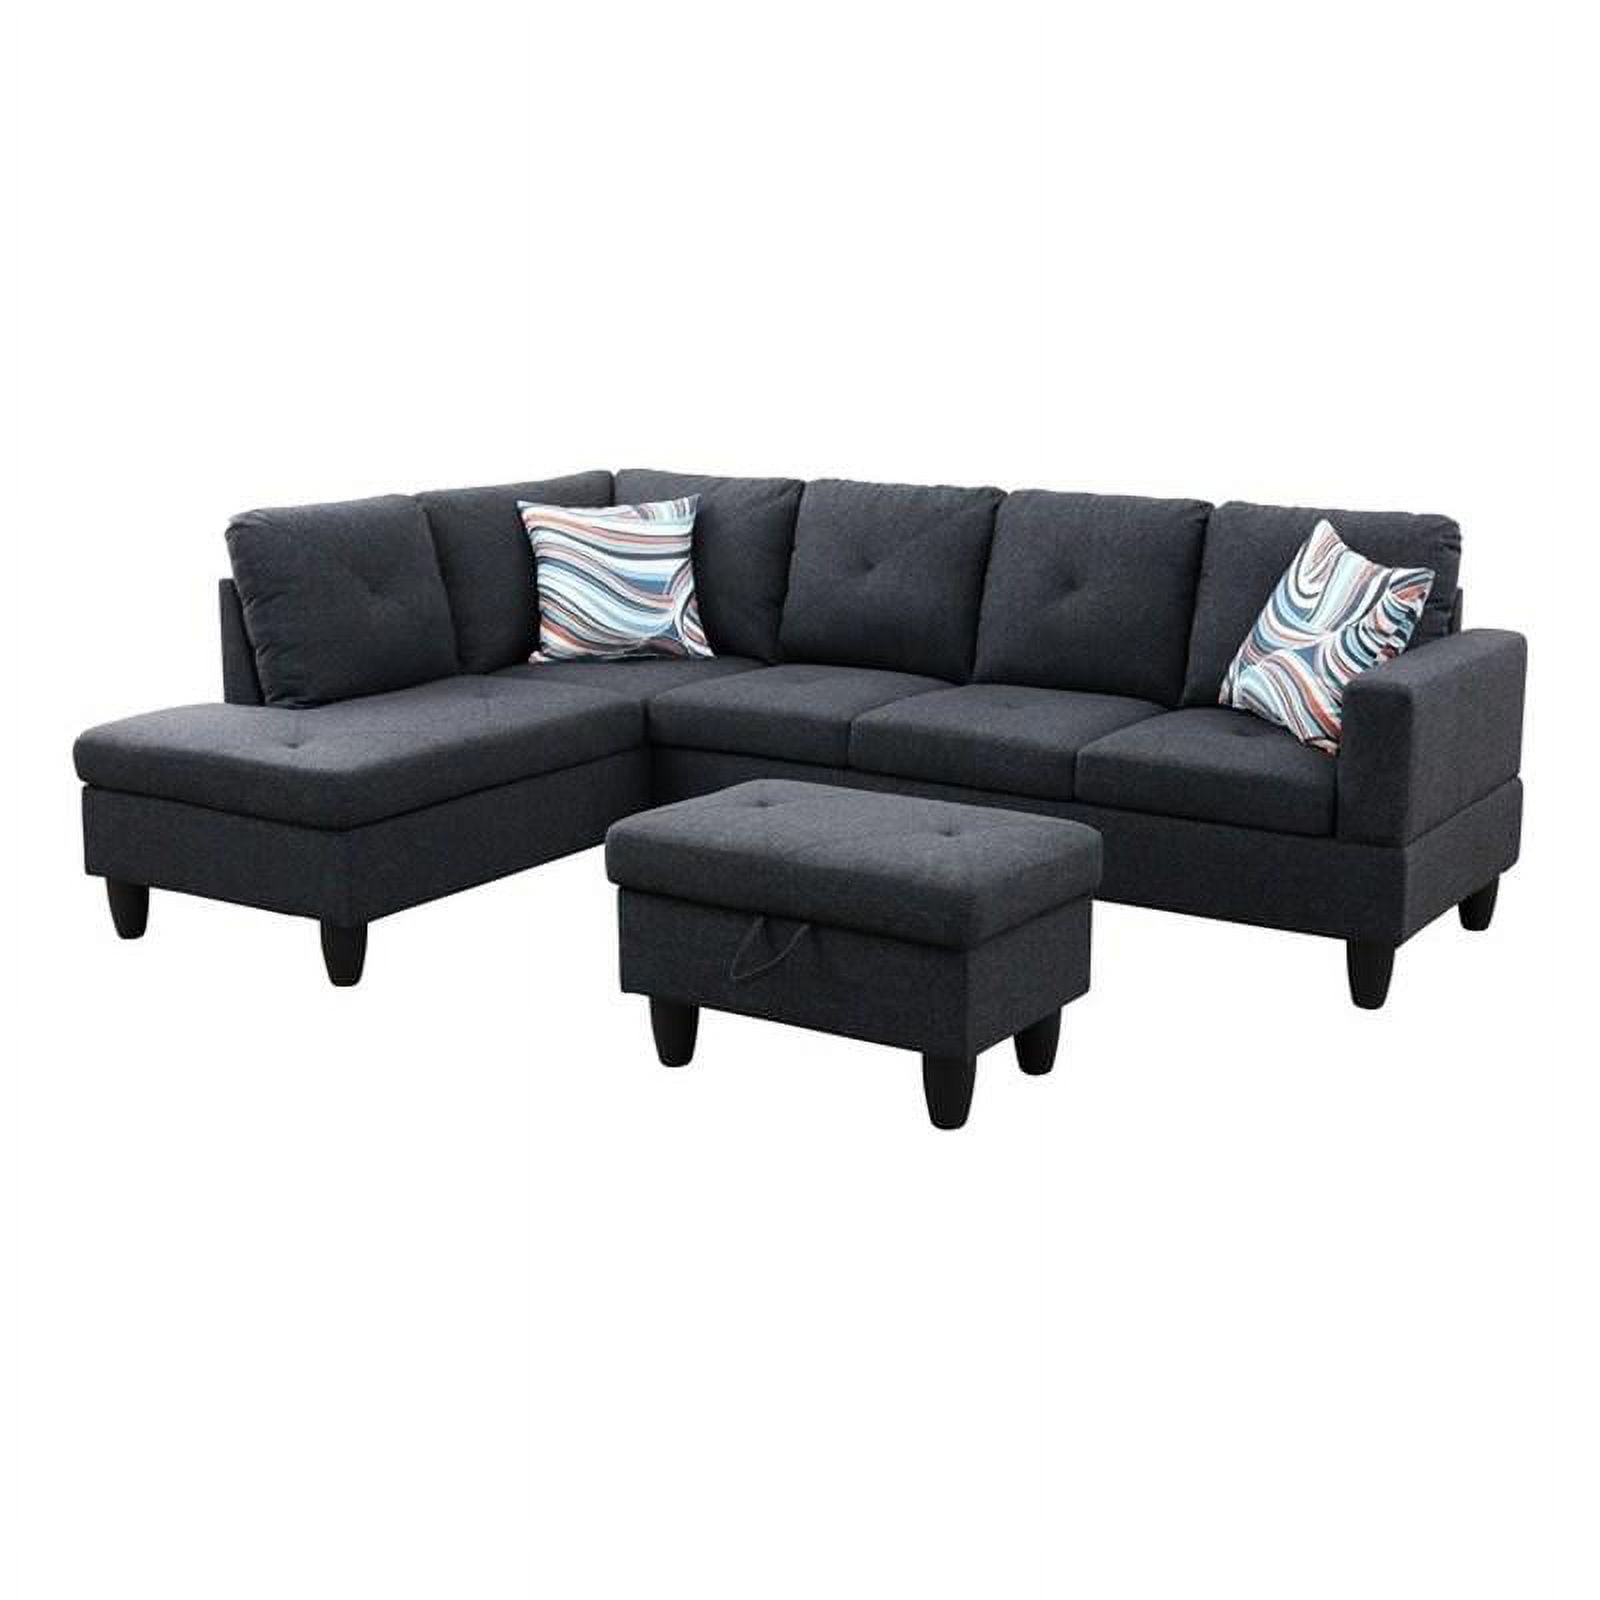 Starhome L Shaped Black Gray Couch With